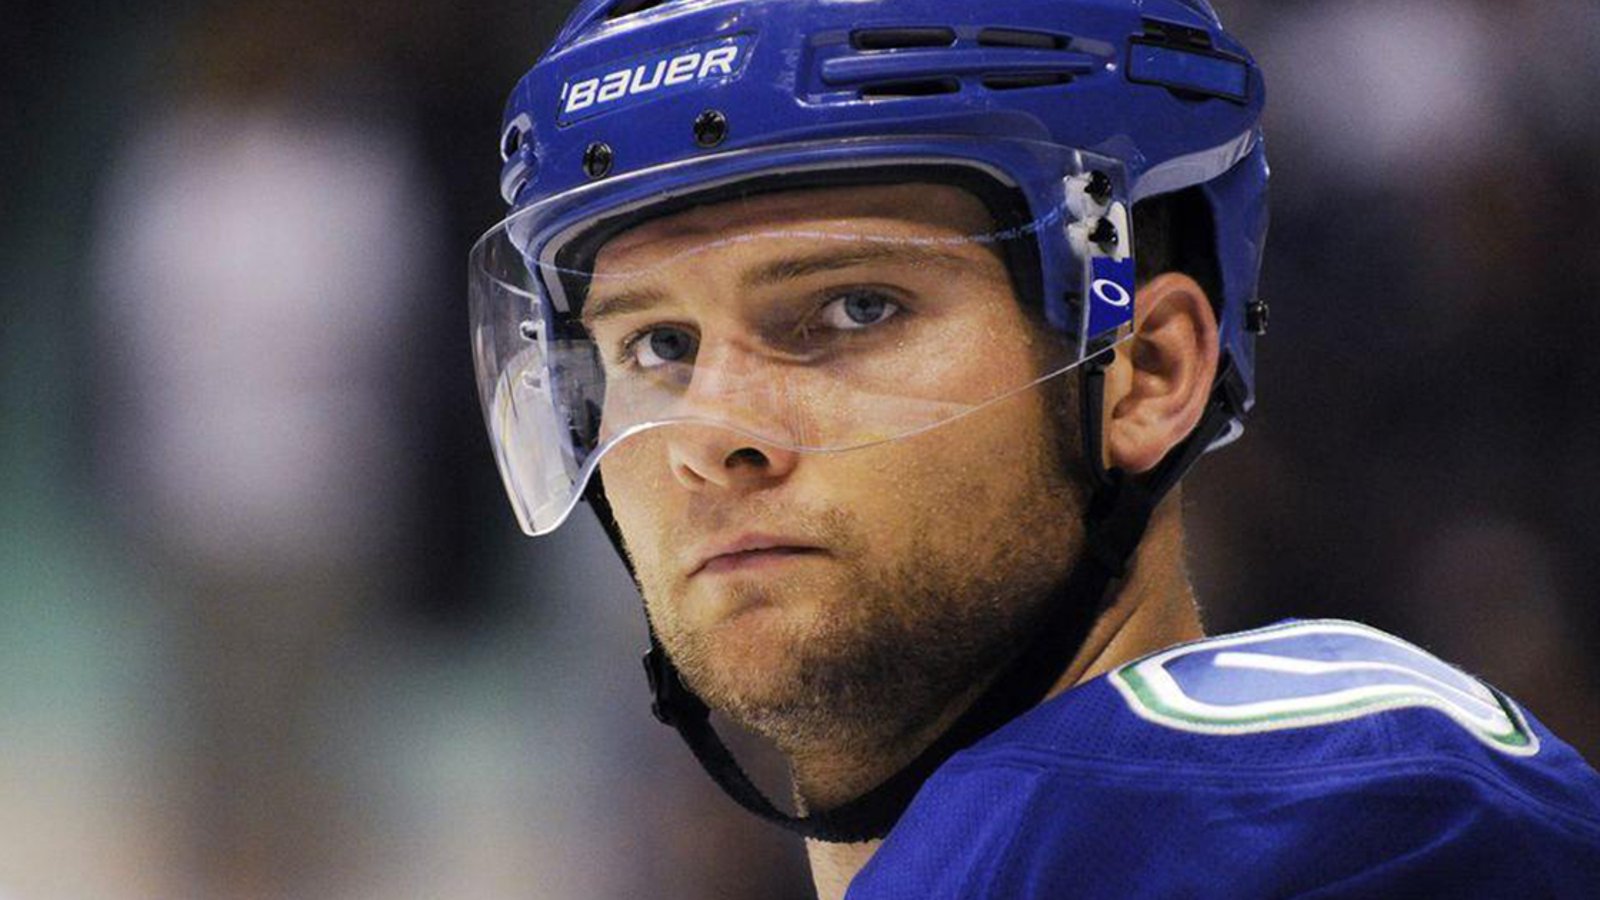 Former NHLer Cody Hodgson reveals the REAL reason he was forced to retire in new documentary